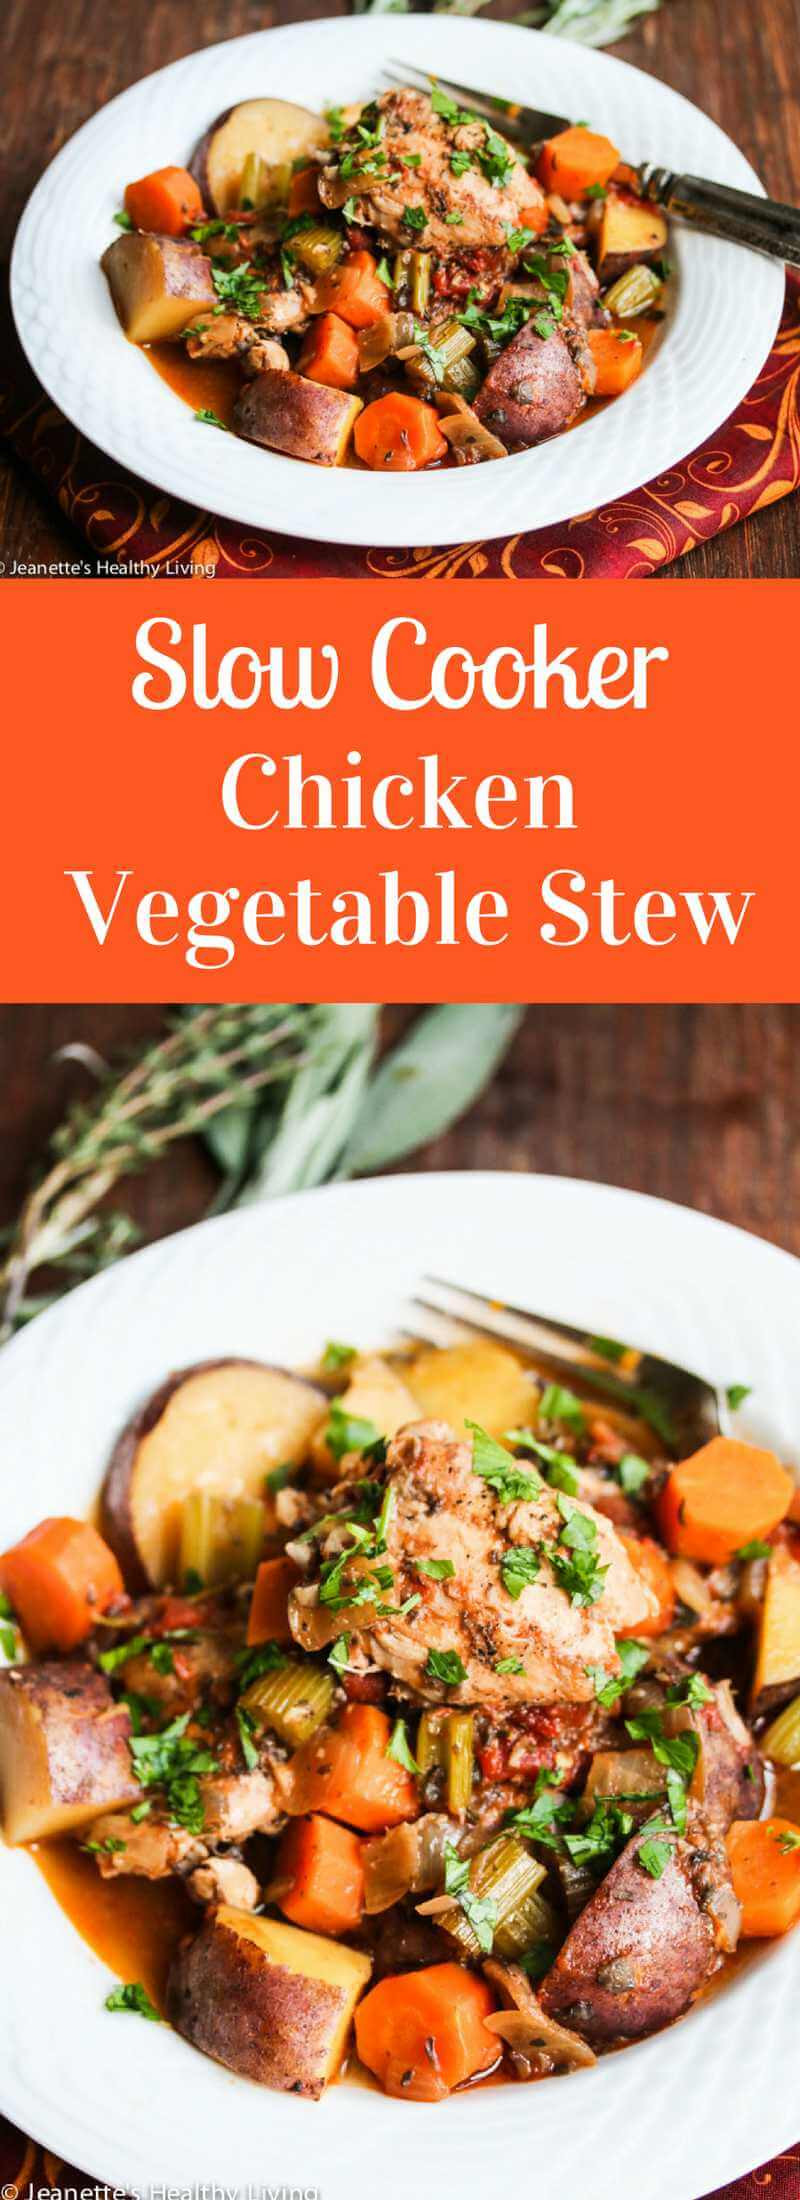 Slow Cooker Chicken Vegetable Soup
 Slow Cooker Chicken Ve able Stew Recipe Jeanette s